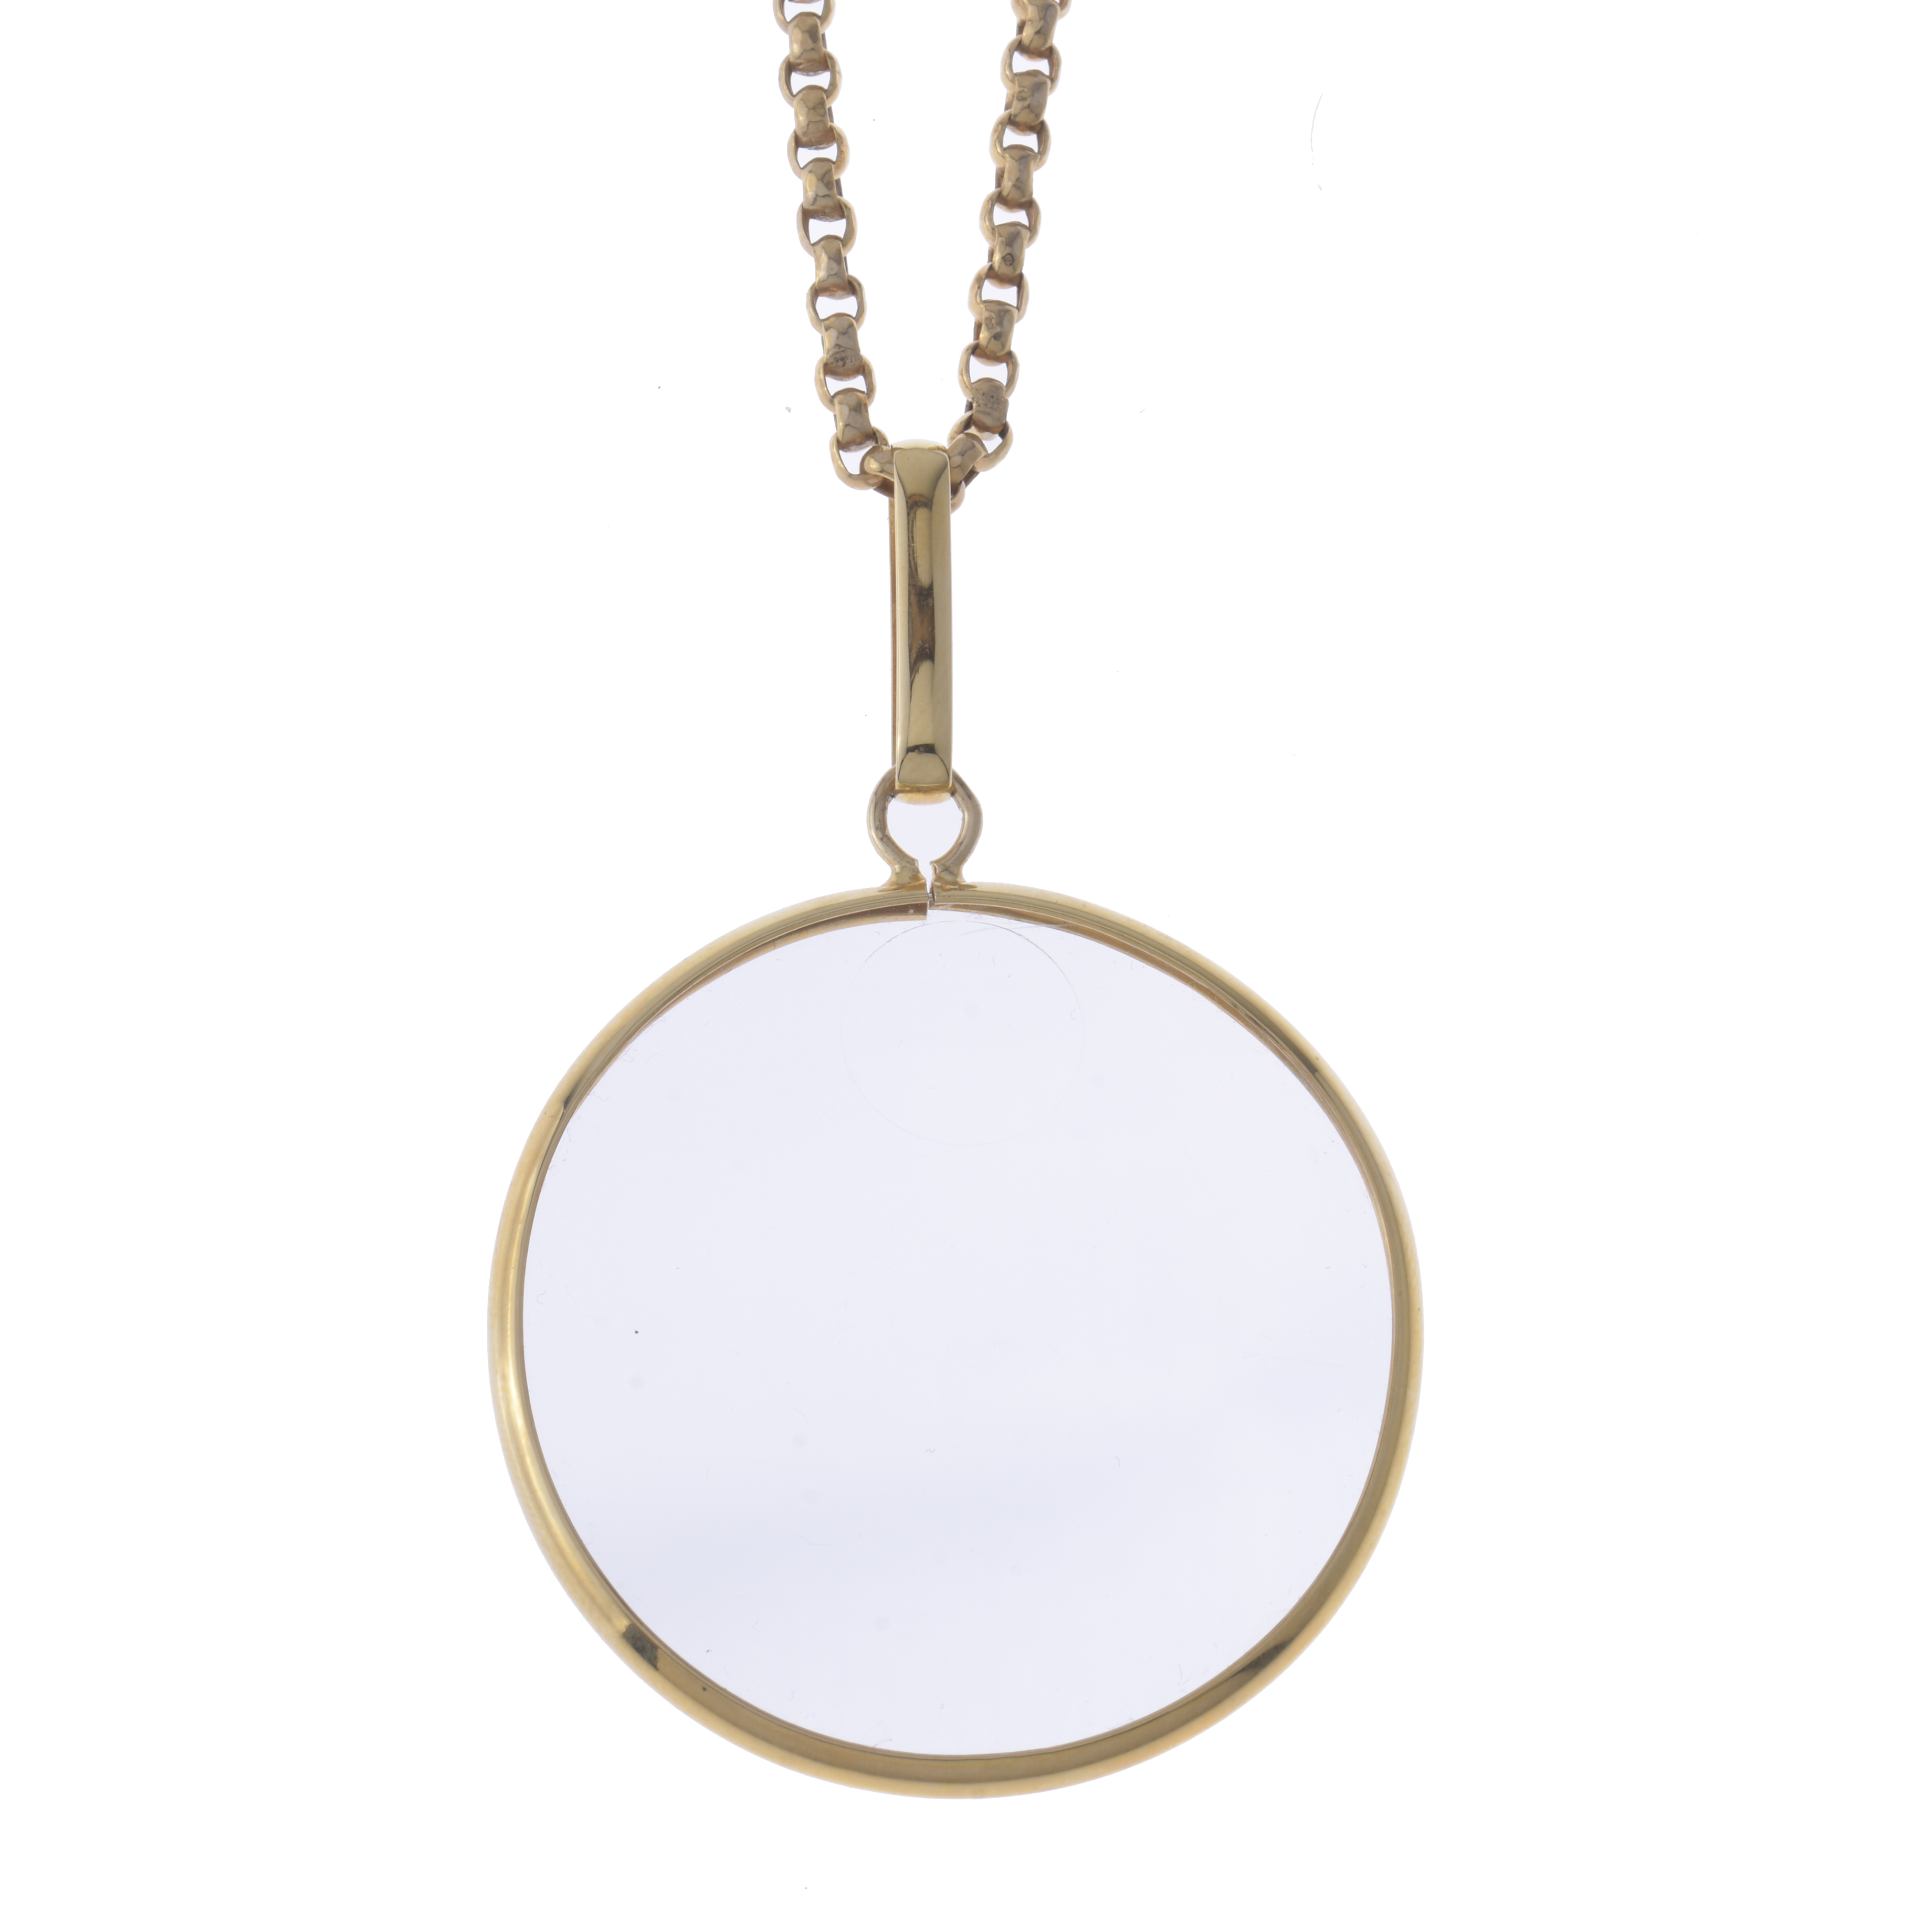 MAGNIFYING GLASS PENDANT IN GILDED METAL AND CHAIN IN GILDE